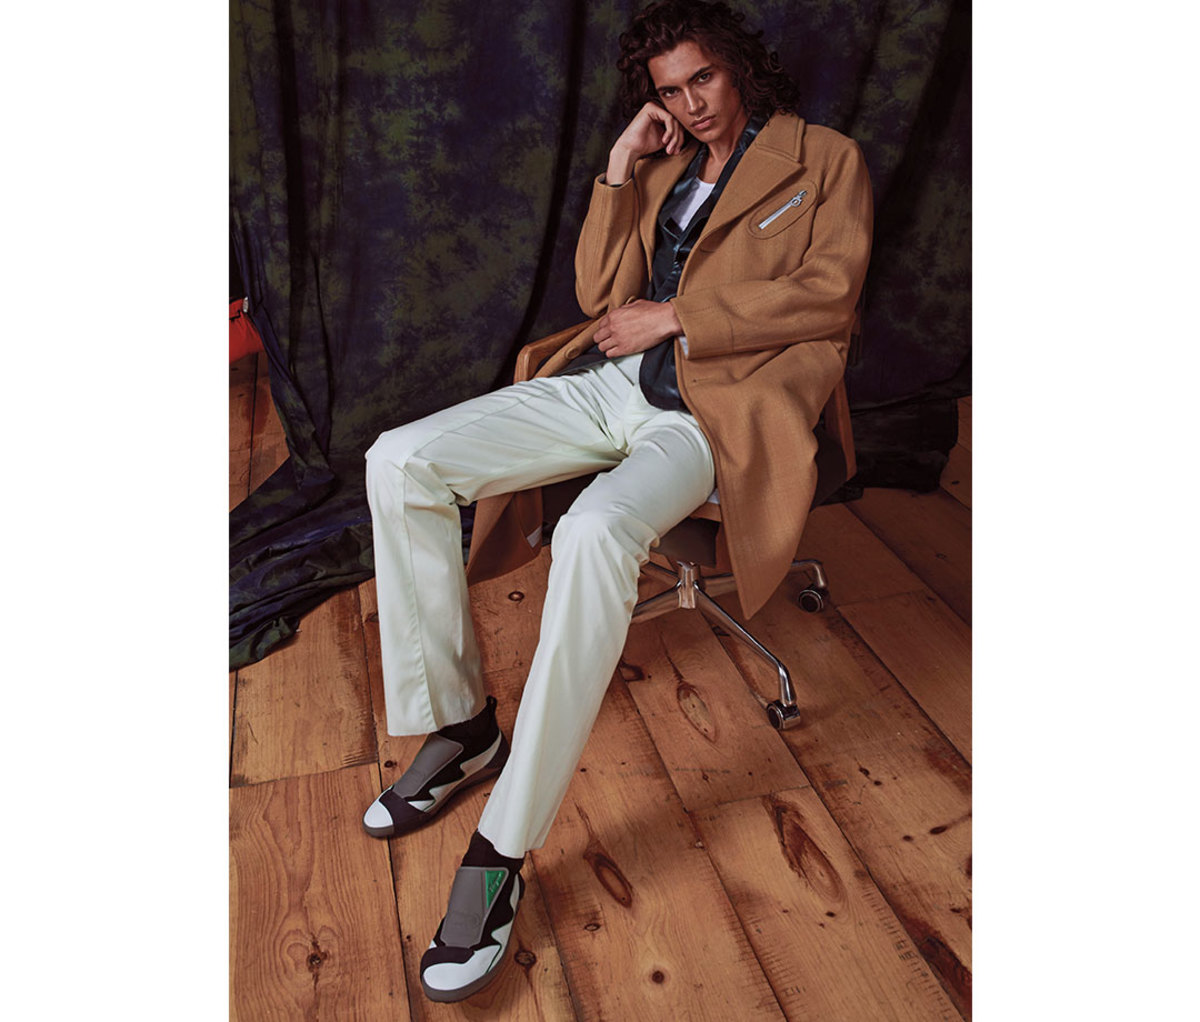 Man with shoulder-length hair sitting in chair wearing camel-colored coat, white pants, and sneakers